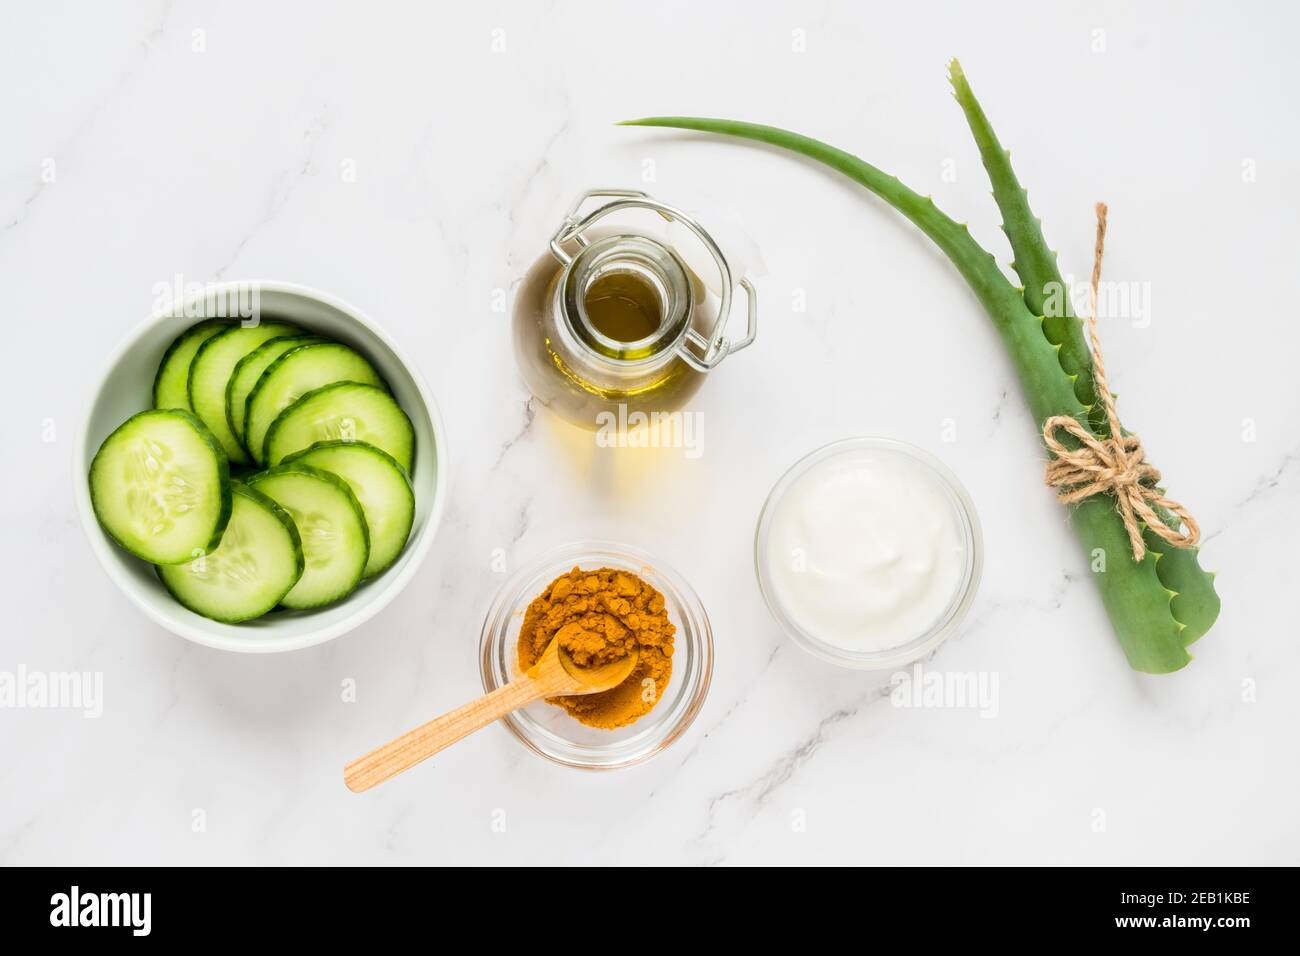 Homemade skin care concept. Green natural ingredients aloe vera, lemon, yogurt, turmeric, cucumber for making a cosmetic mask on a light background Stock Photo